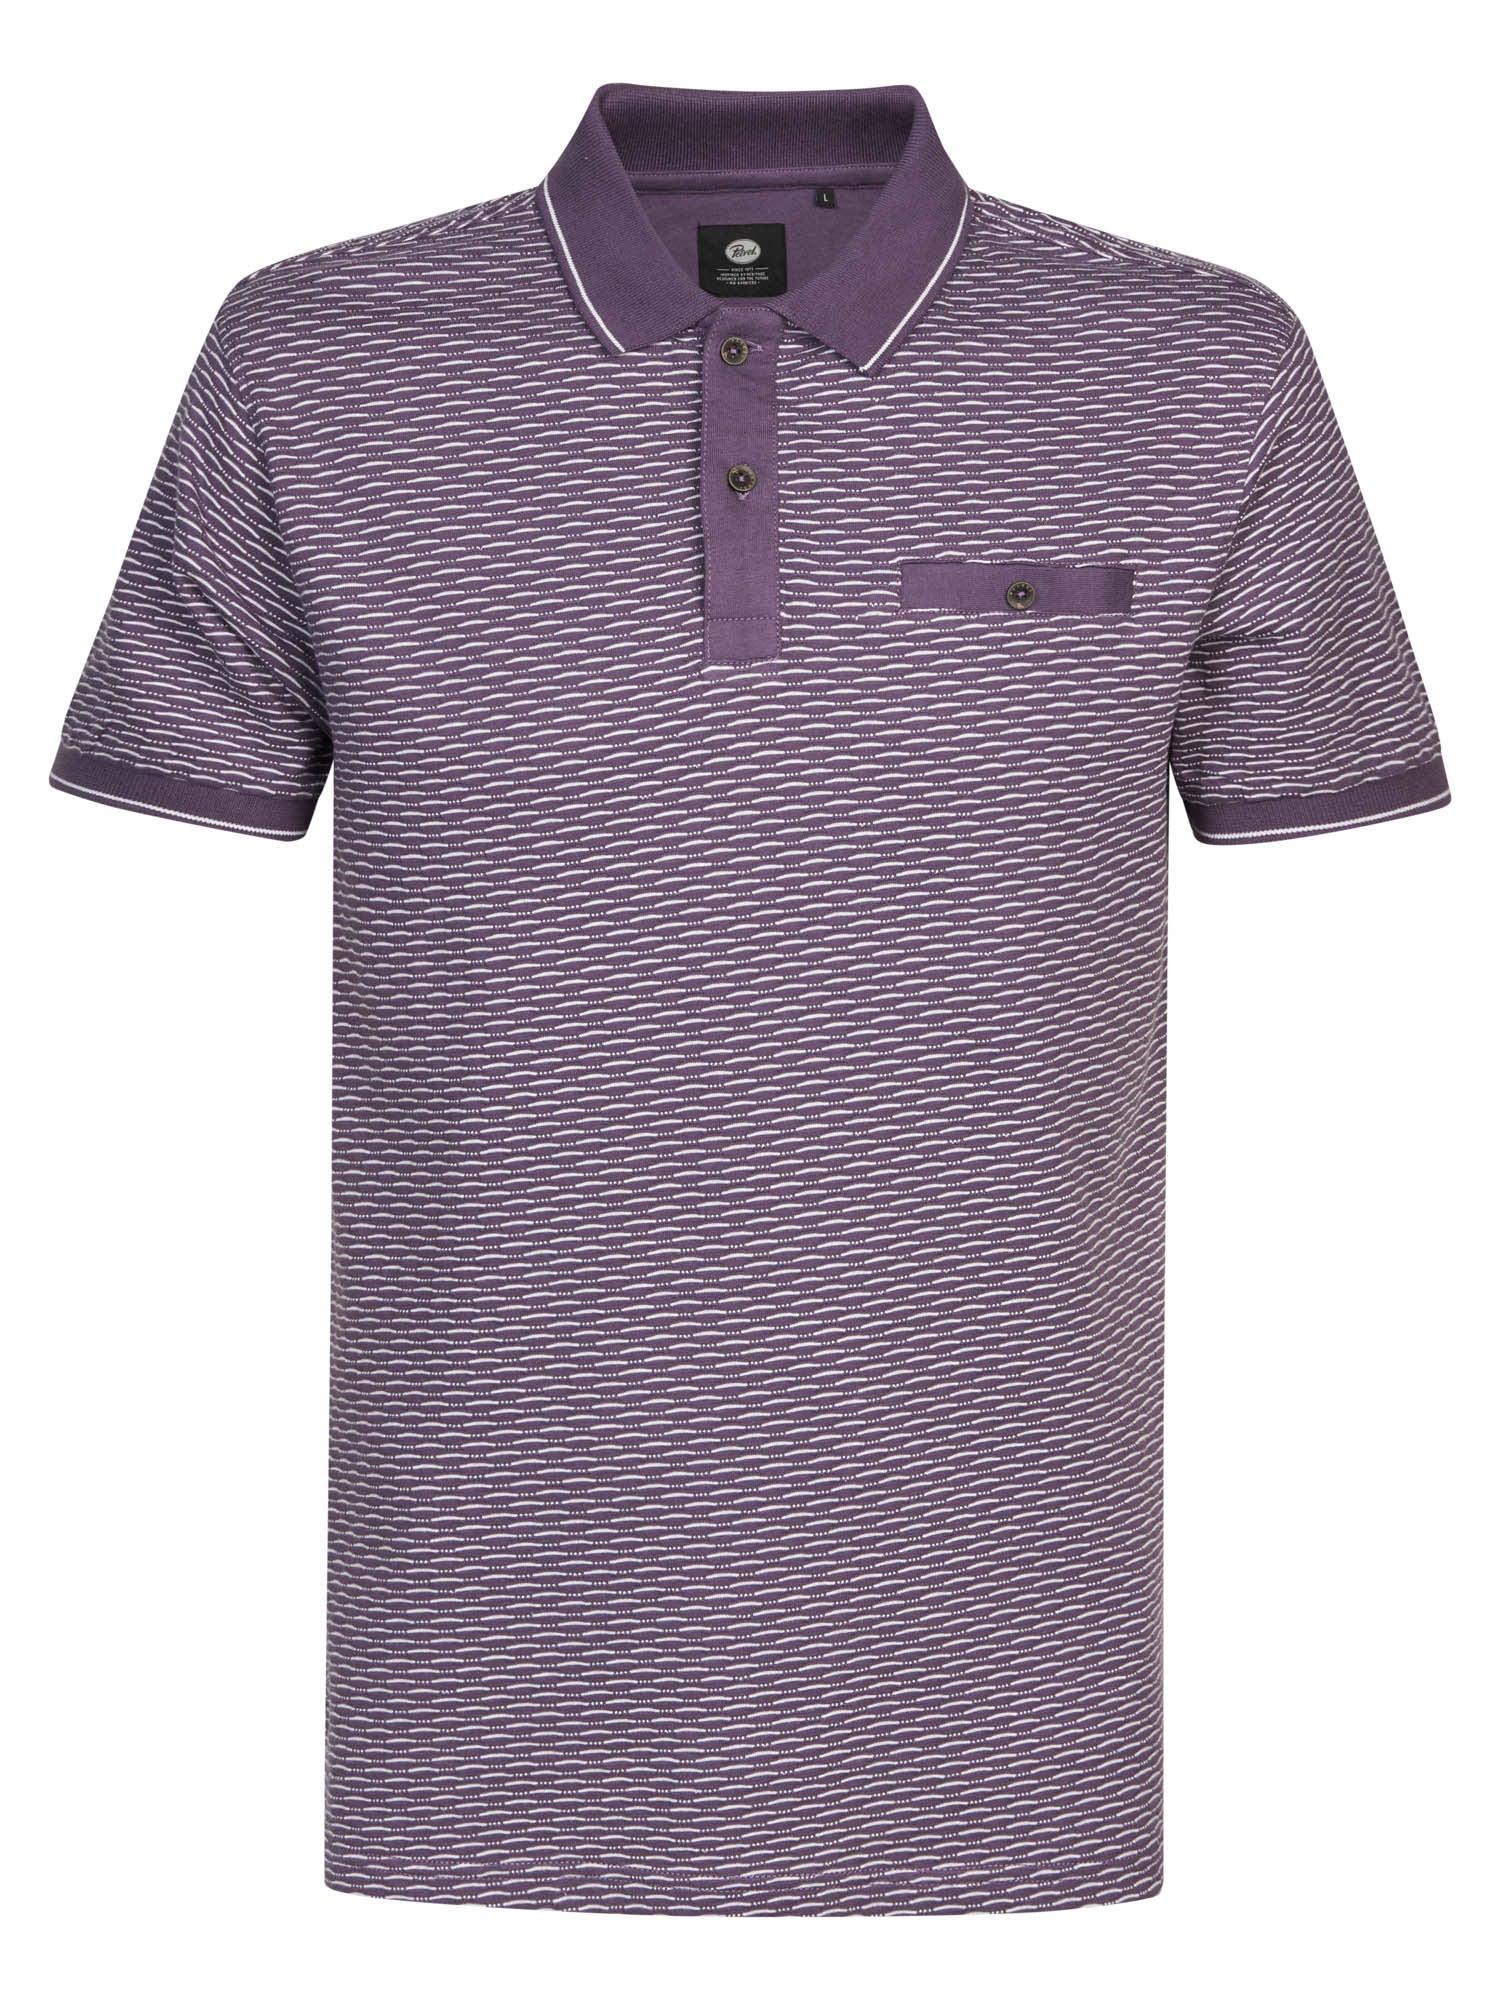 Petrol Industries - Heren All-over print polo - Paars - Maat XL